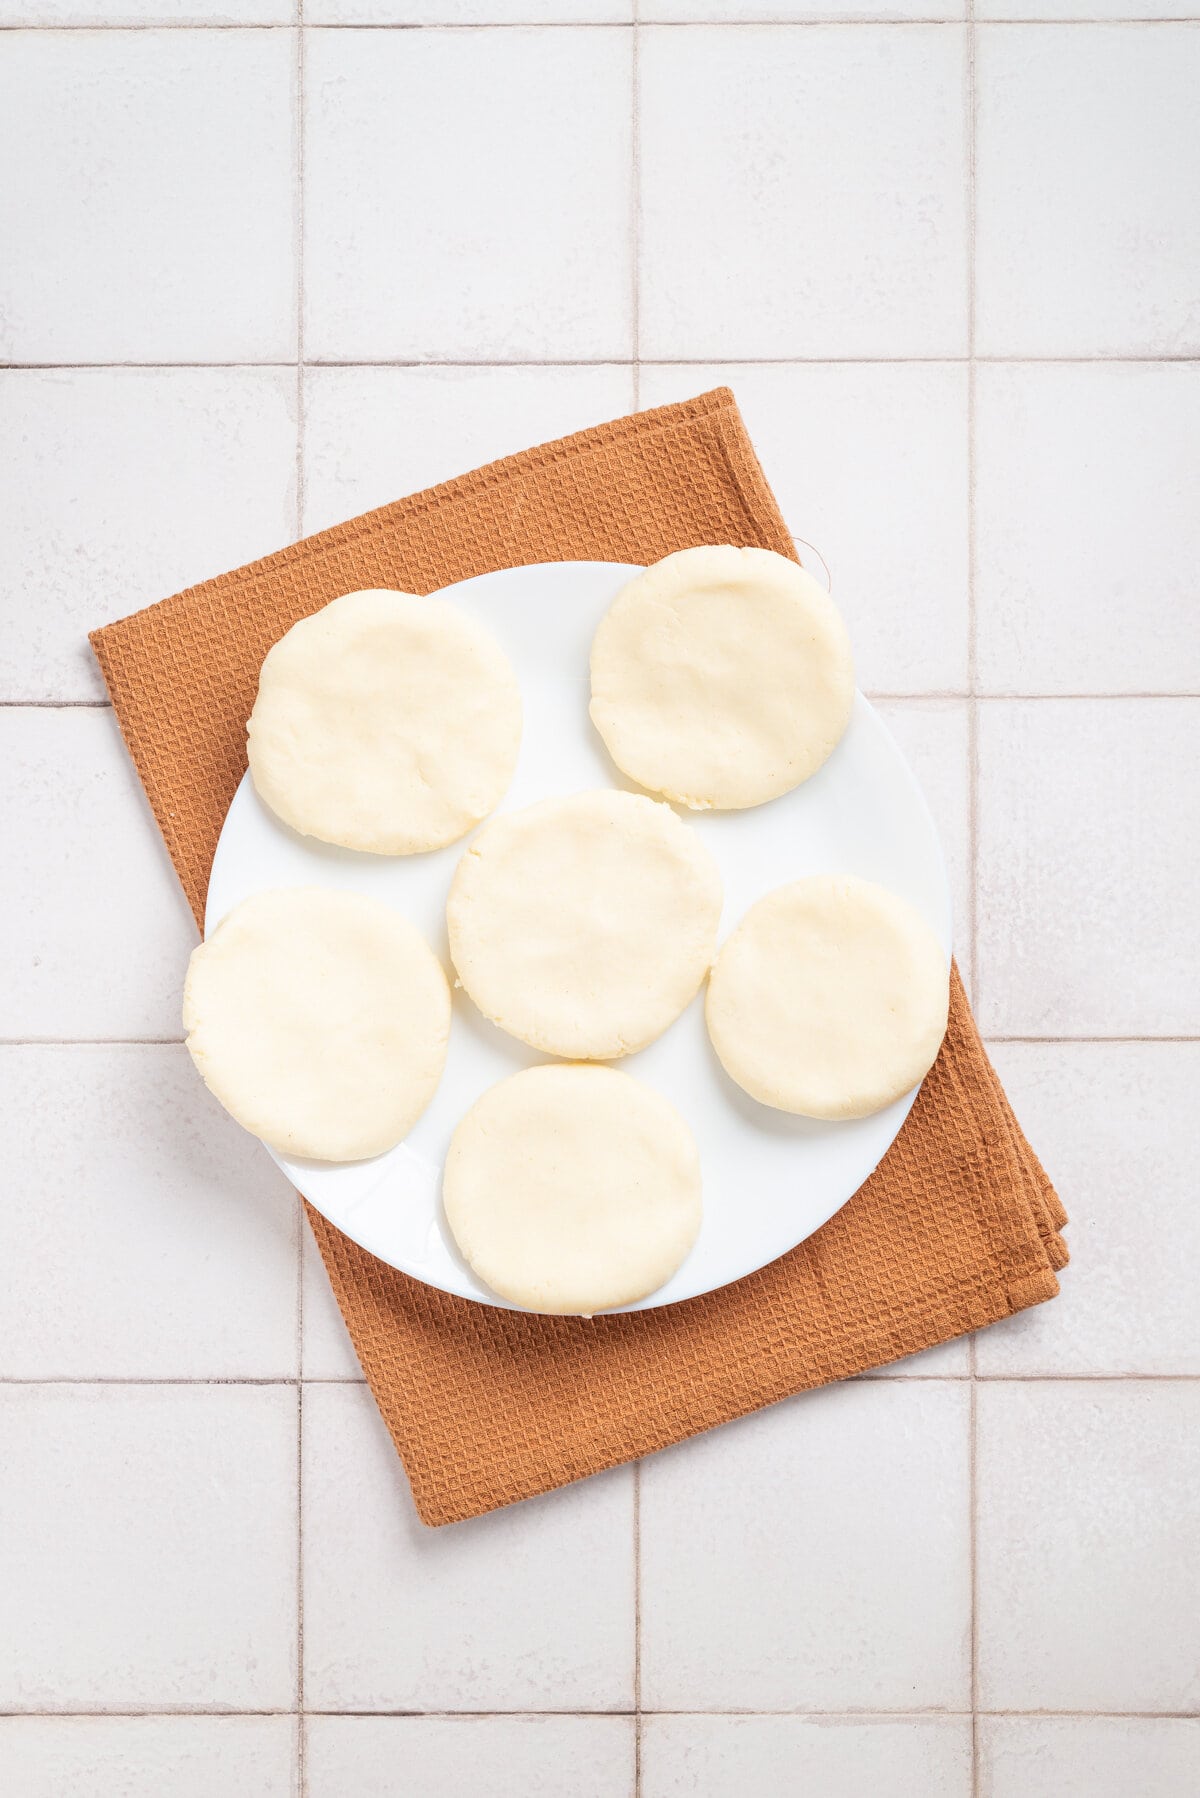 An overhead image of each dough flattened into round discs on a plate.